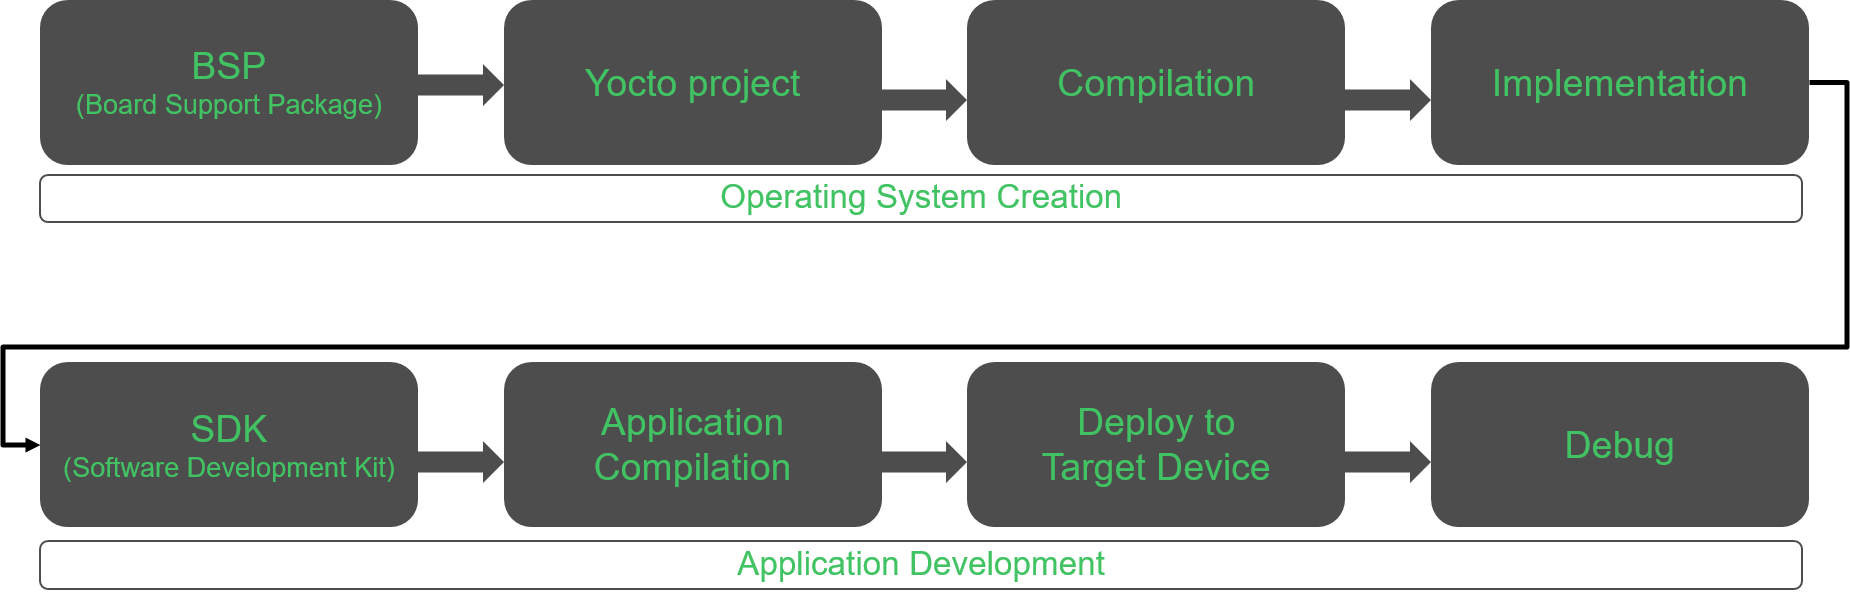 Flow Chart: For Operating System Creation that steps are: BSP > Yocto Project > Compilation > Implemenation - folloed by Application Development with the steps: SDK > Application Compilations > Deploy to Target Device > Debug